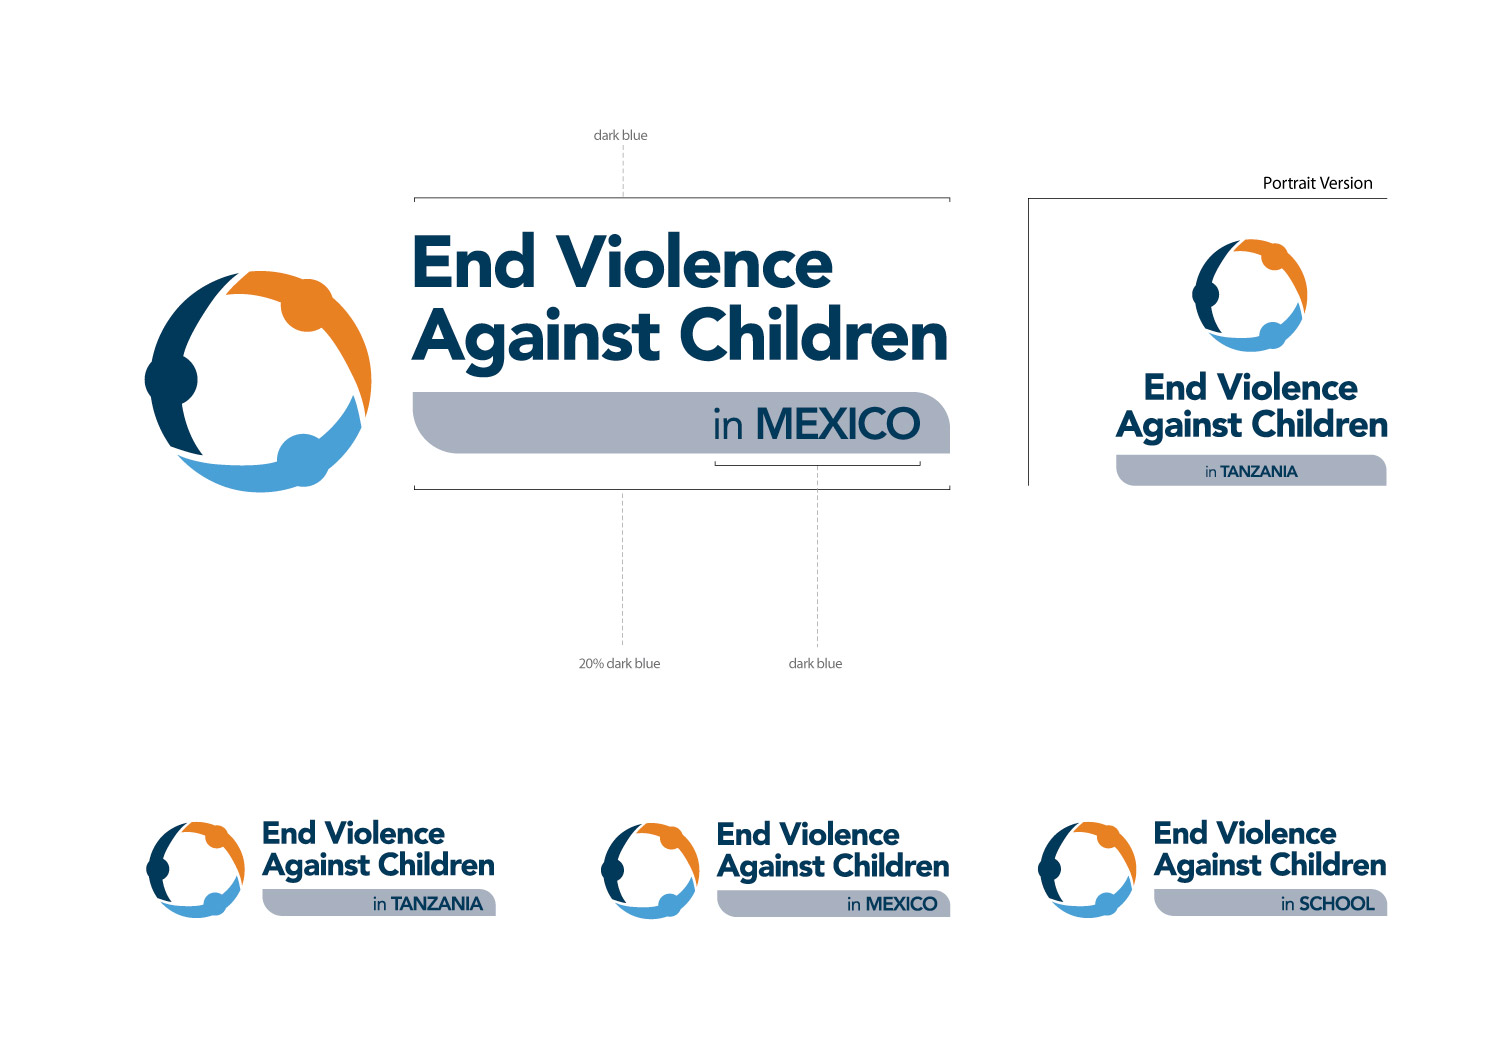 The Global Partnership to End Violence Against Children